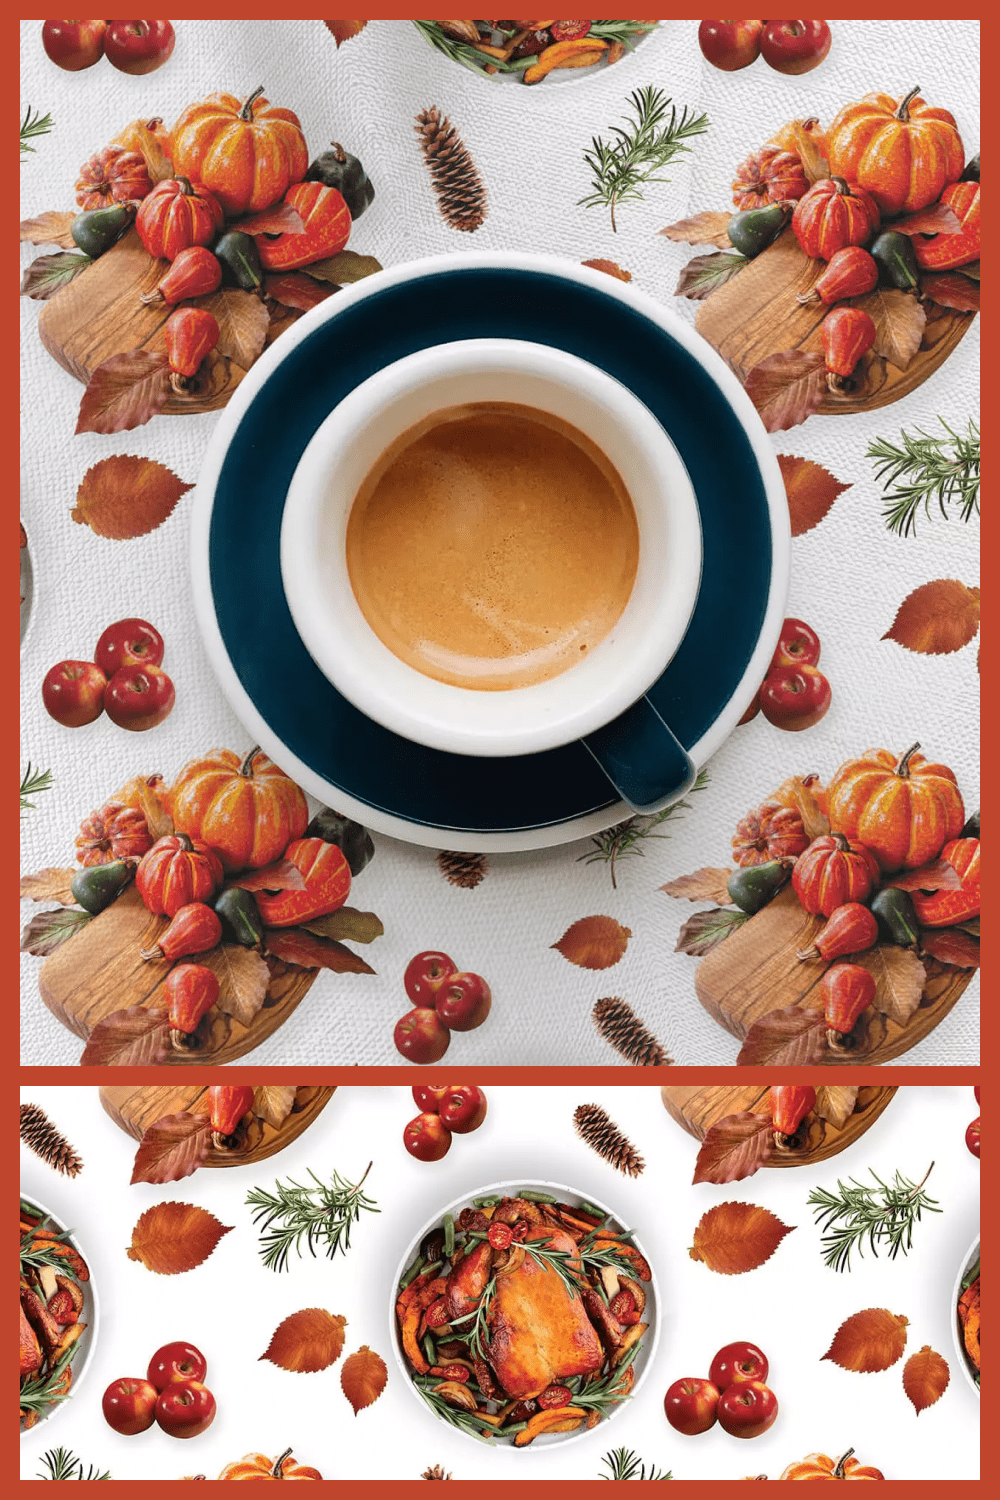 Cup of coffee on a saucer on the table with pictures of pumpkins and turkey.